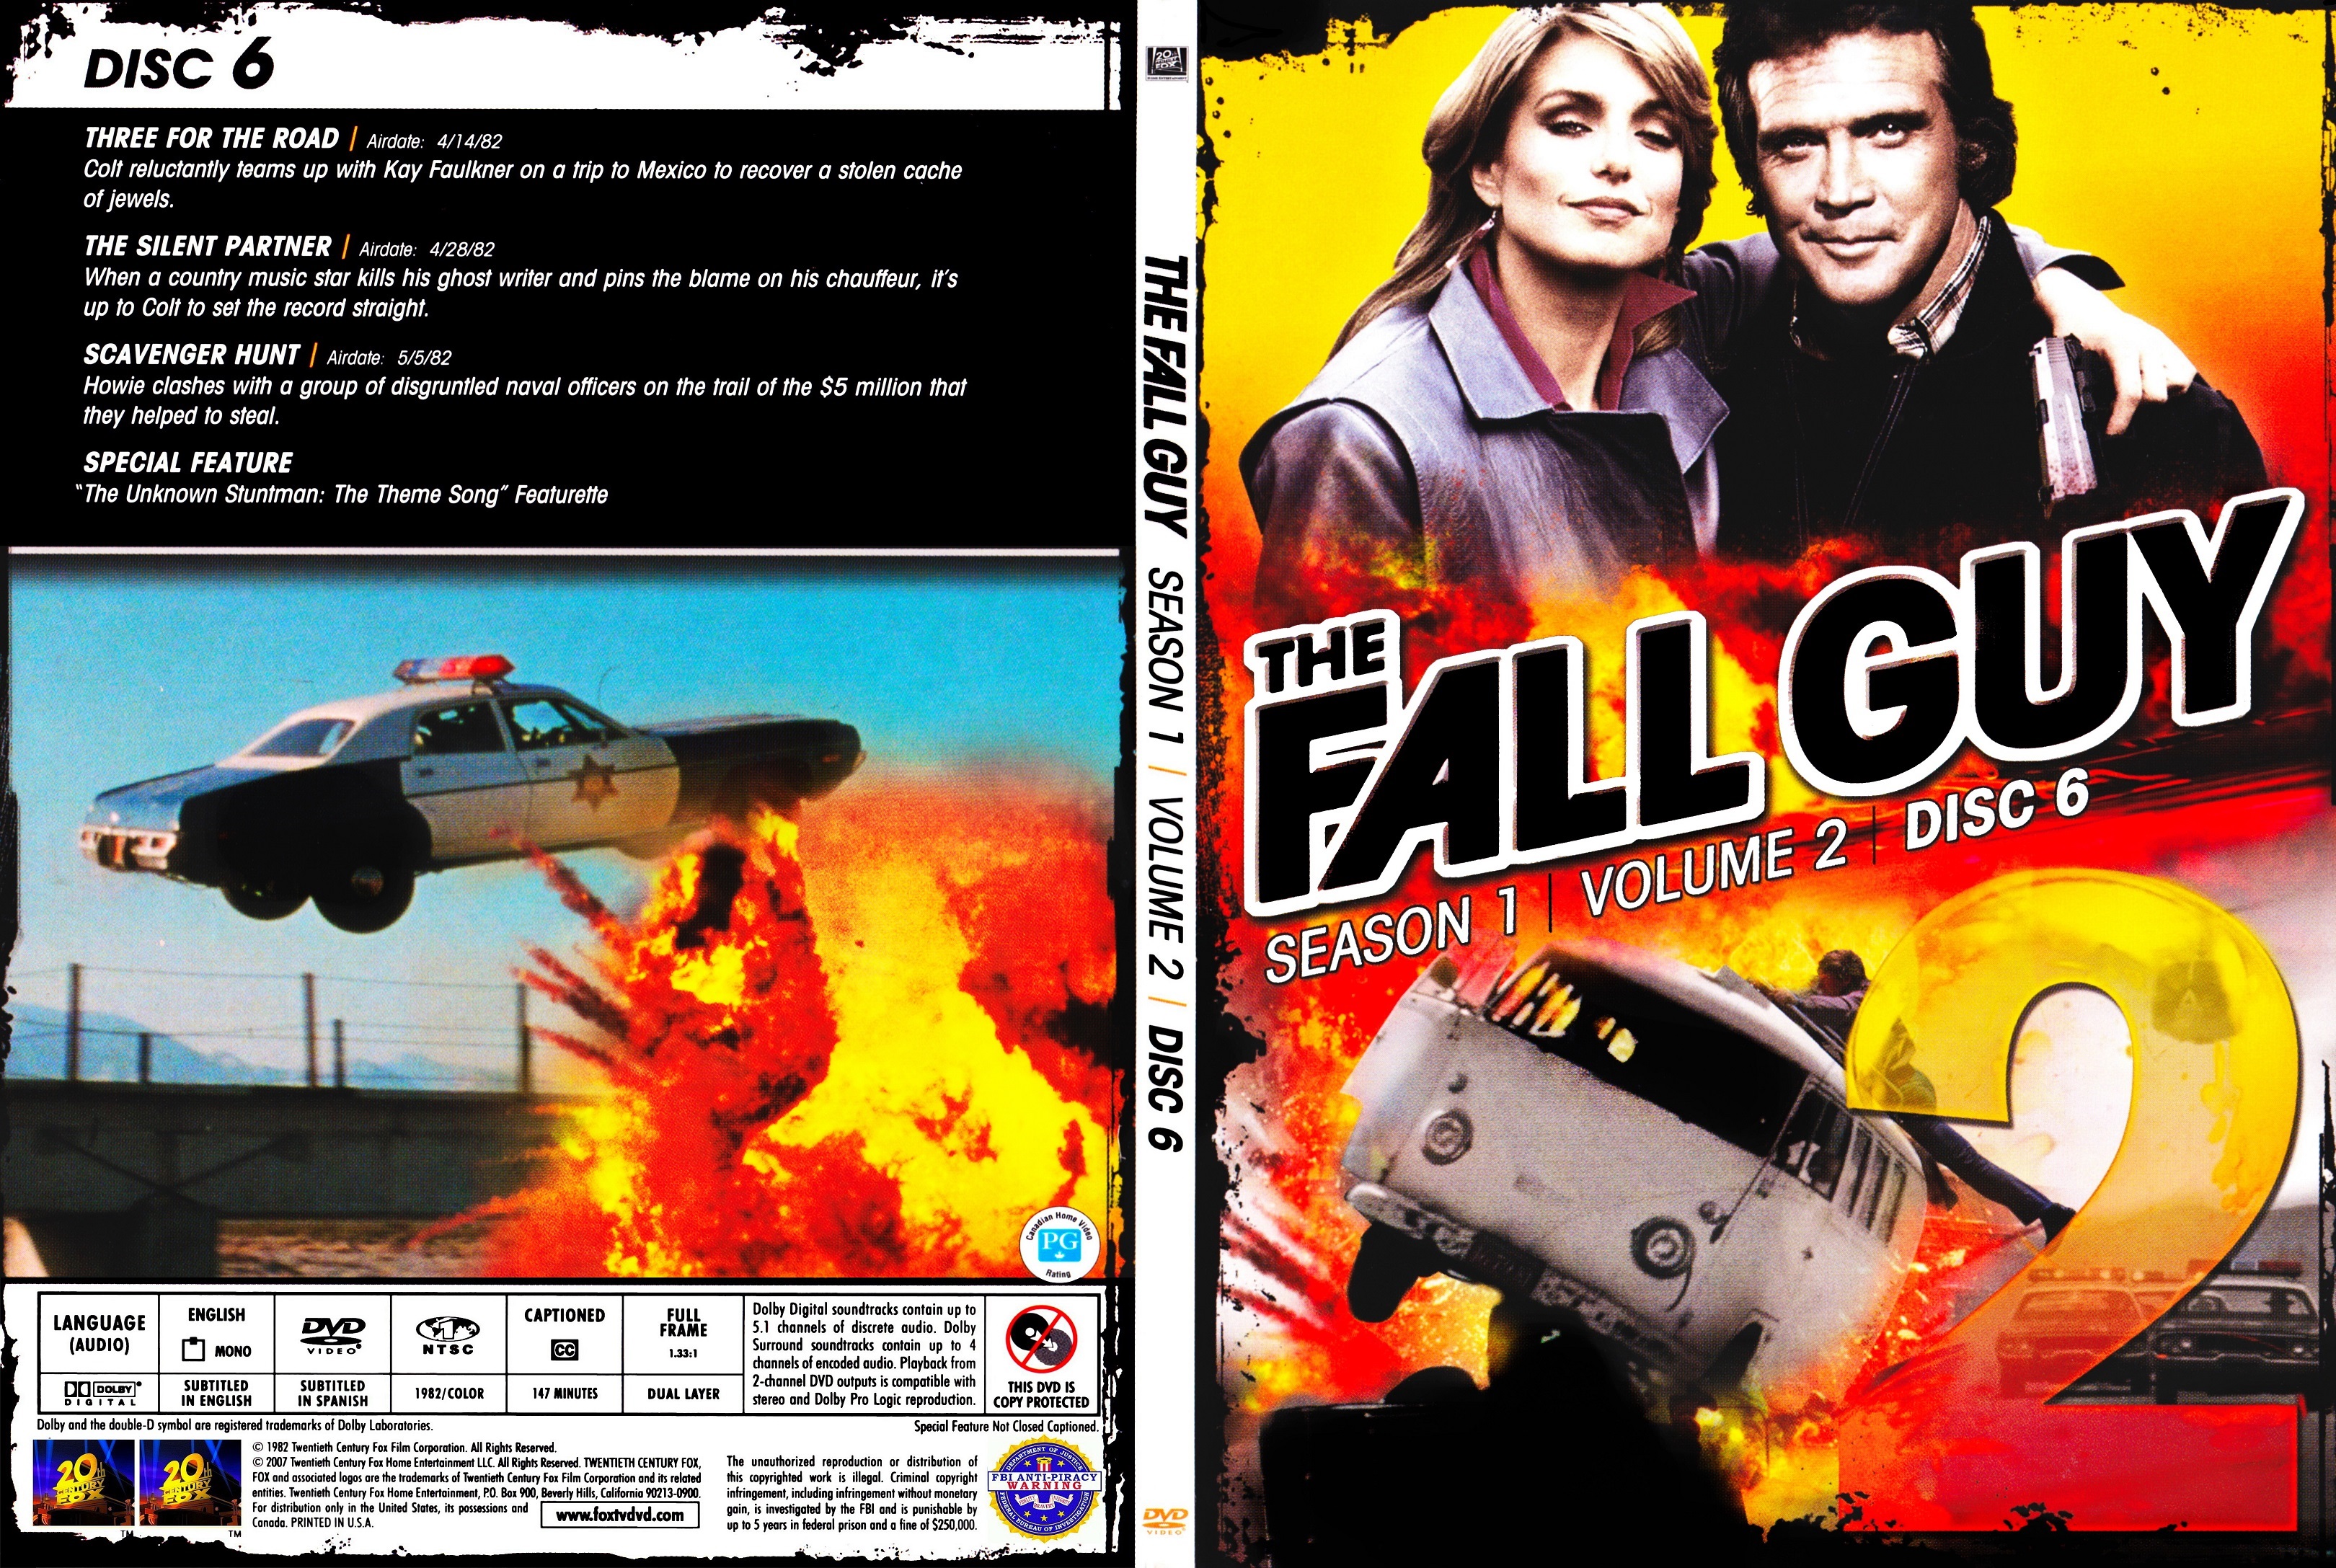 Fall Guy Movie Download. About Fall Guy Movie Download